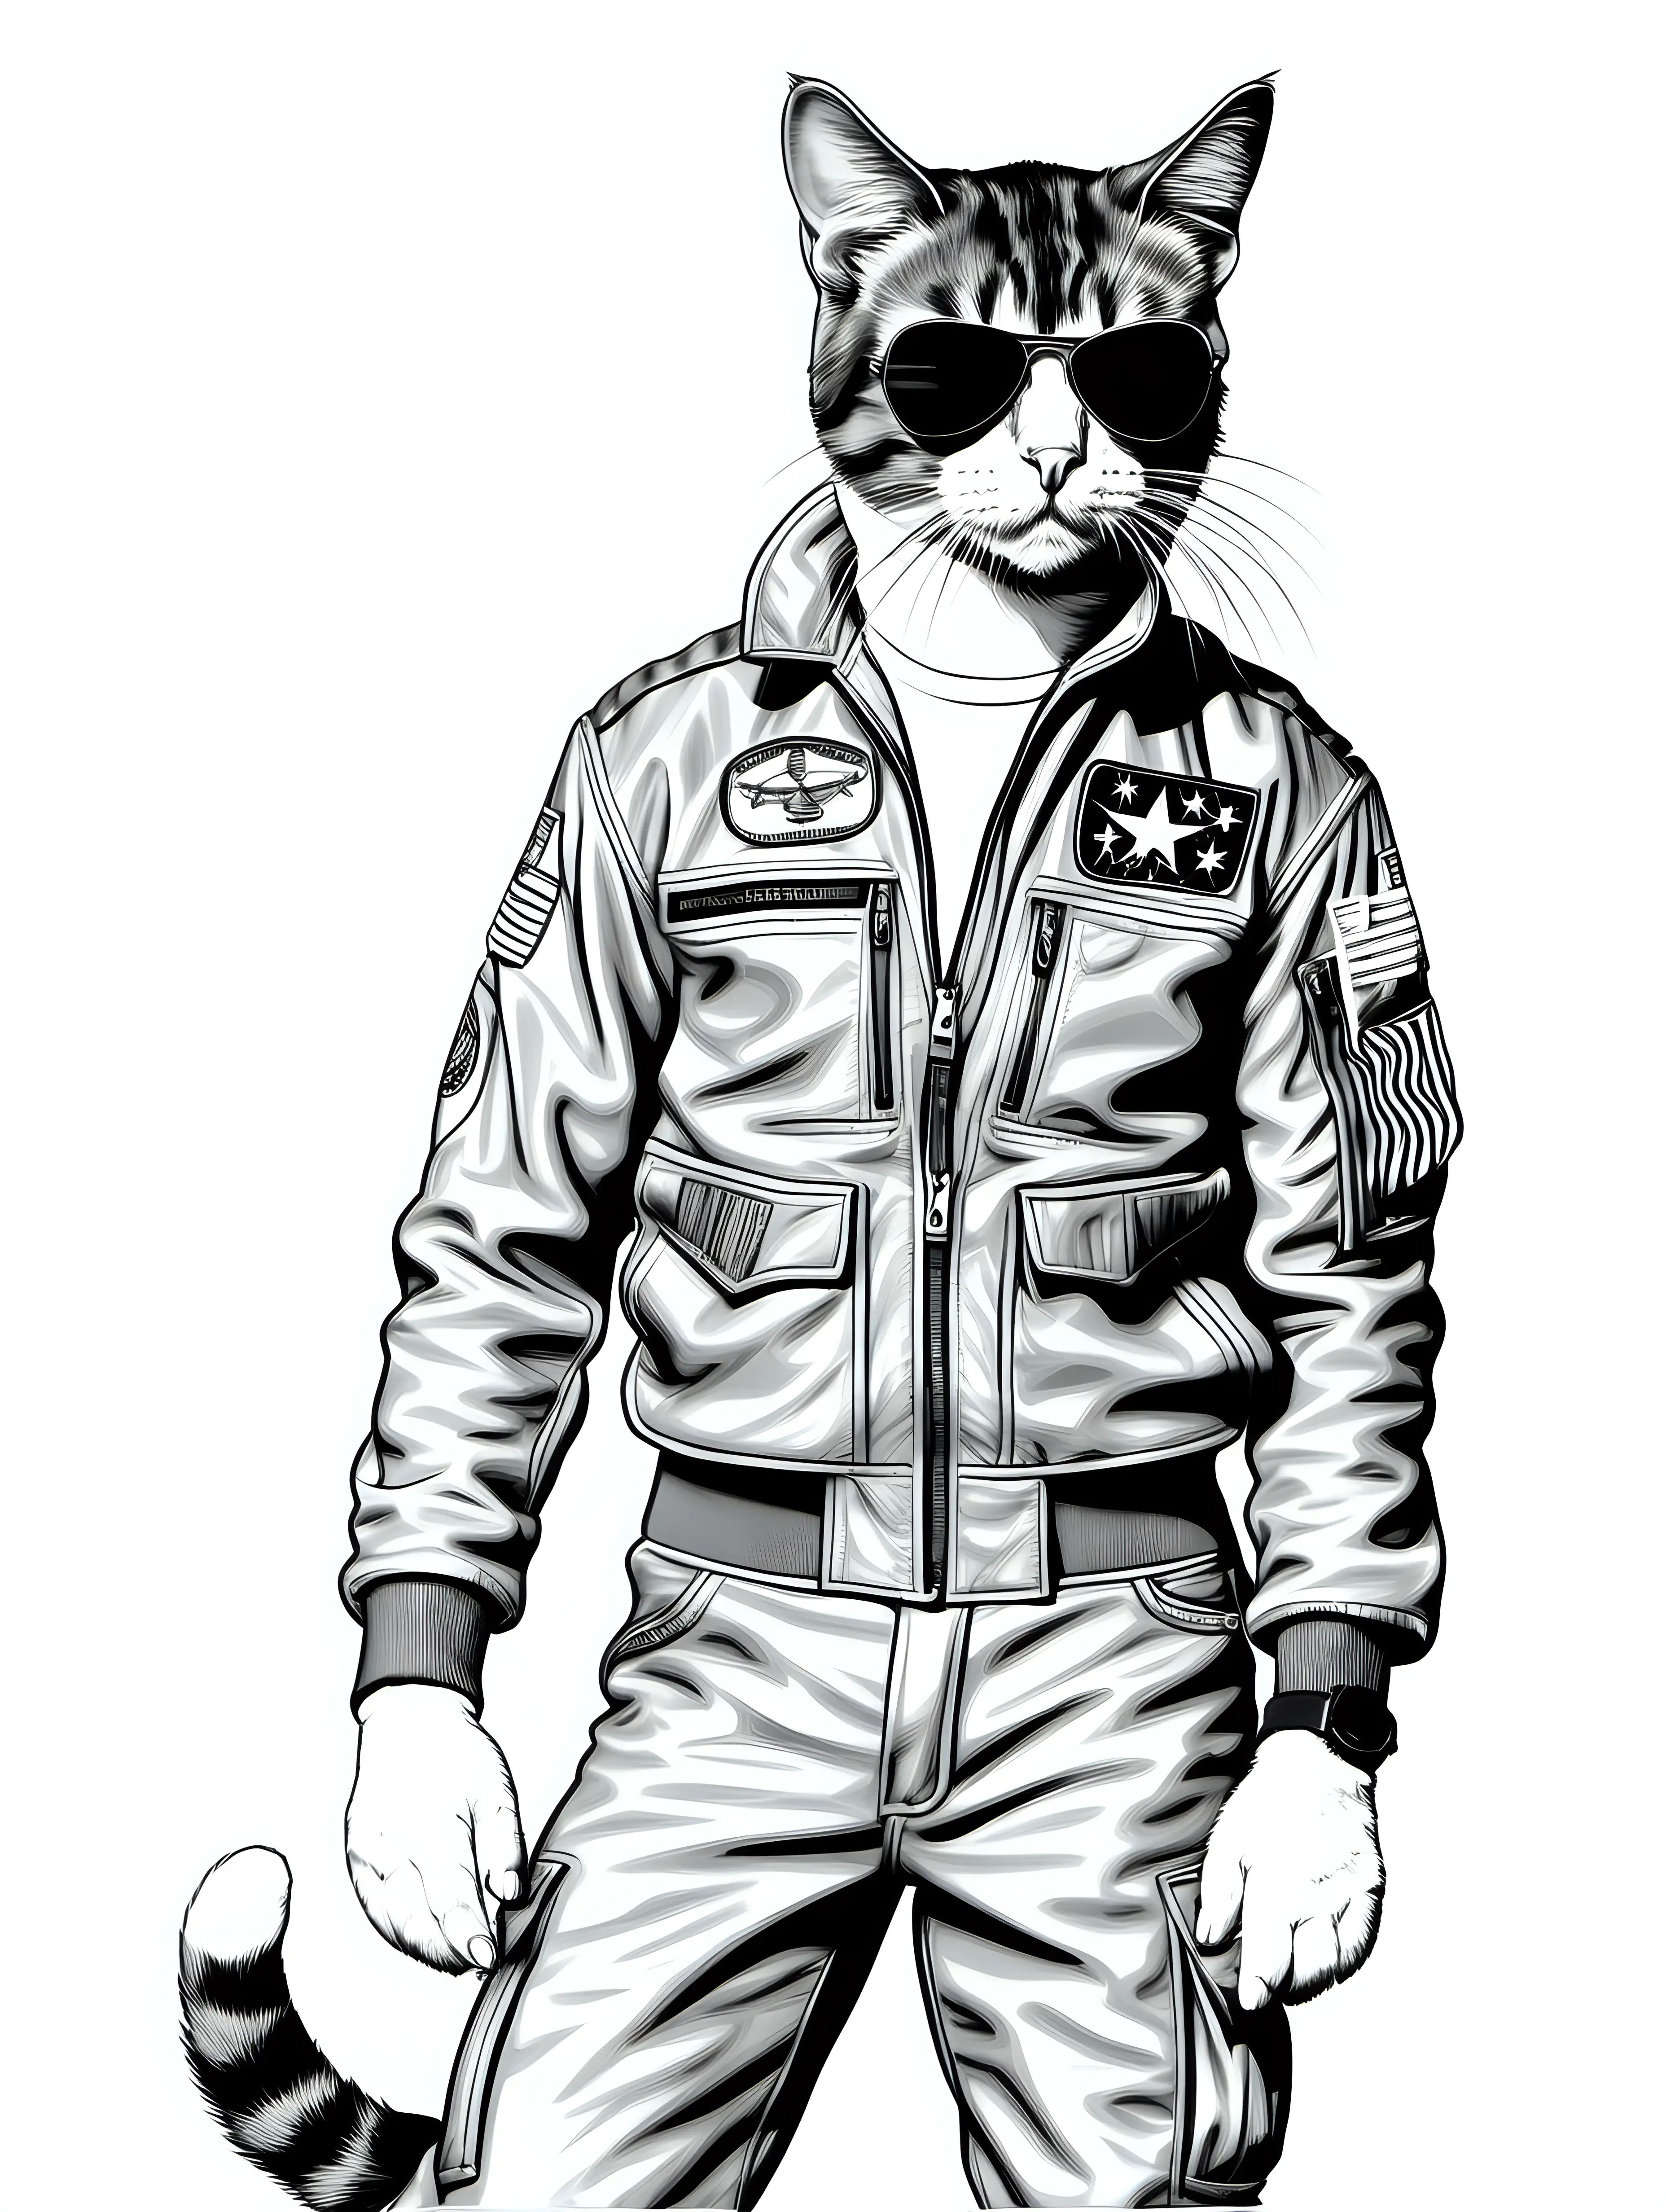 Top Gun Cat Adult Coloring Page on Clean White Background